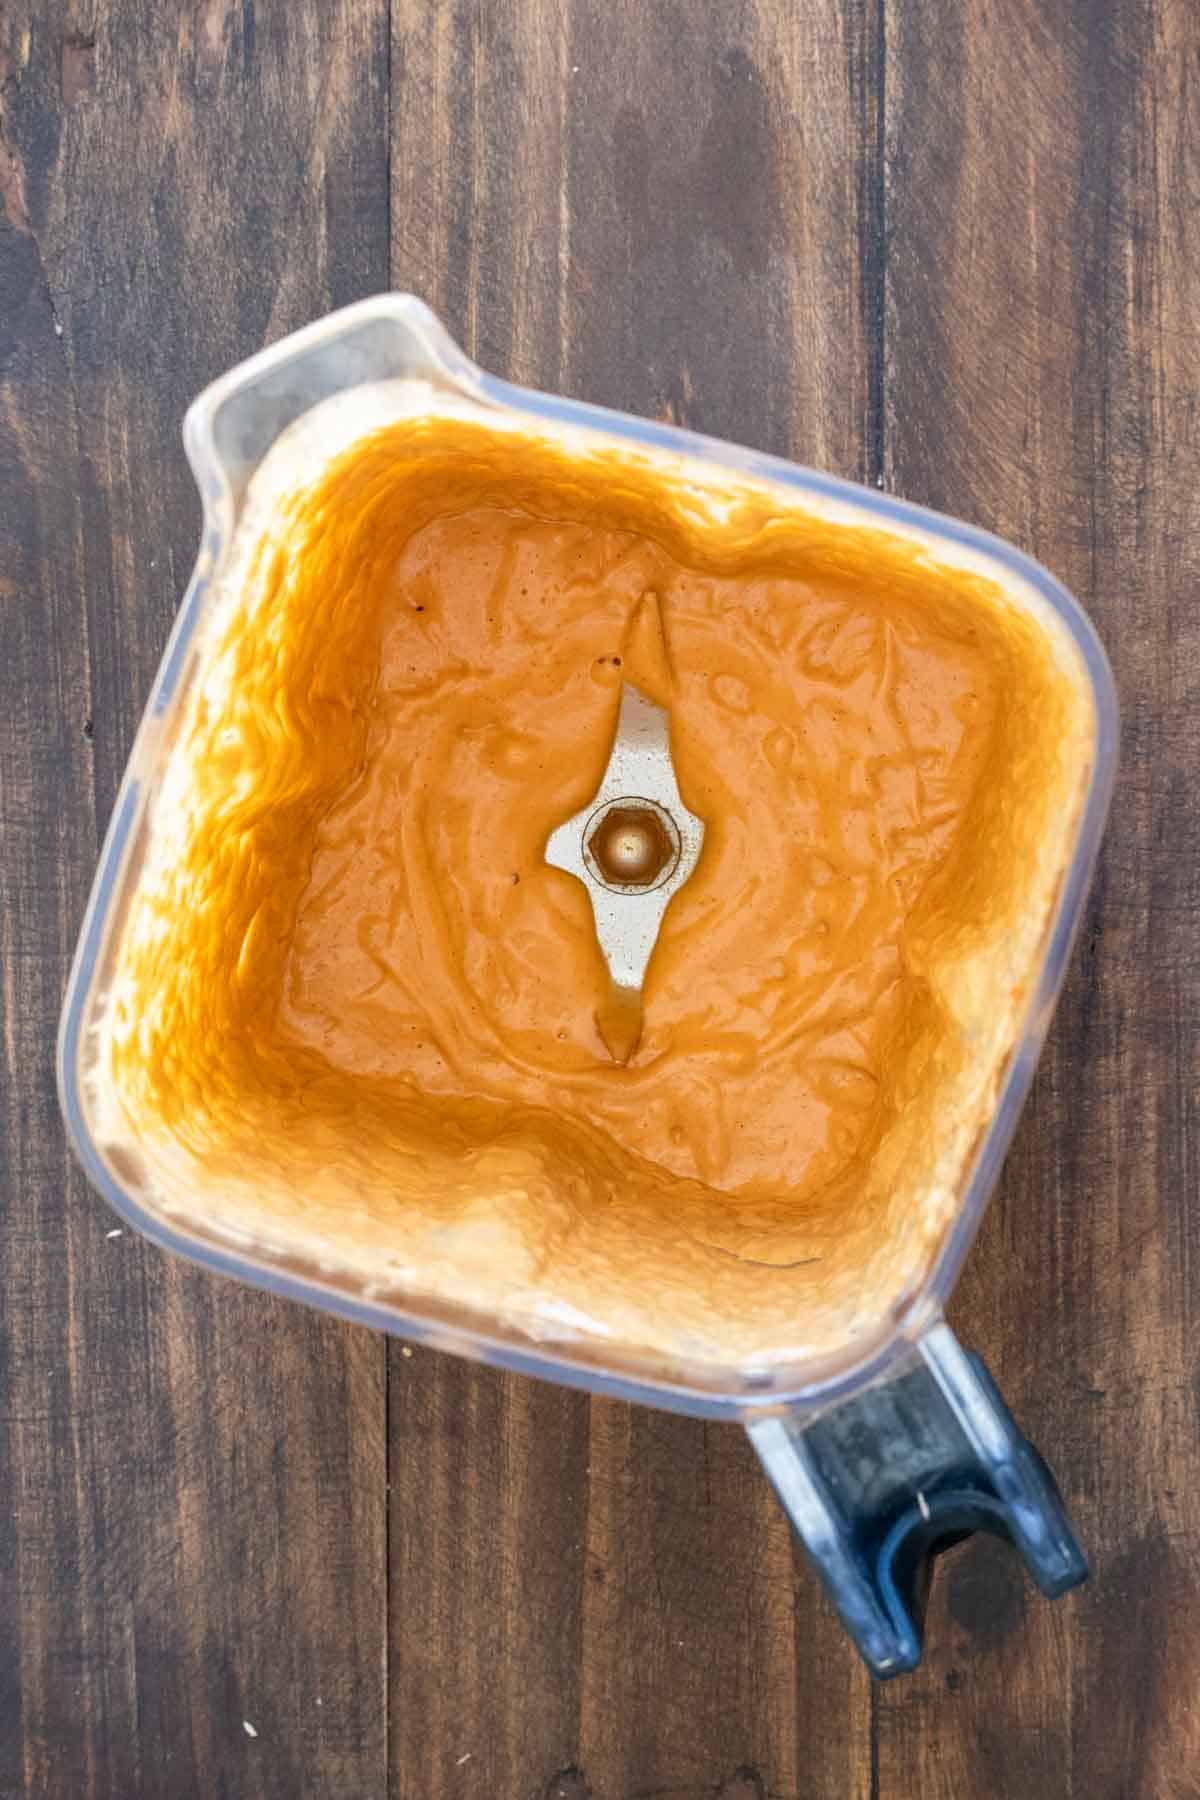 Top view of a blender with an orange colored creamy sauce in it